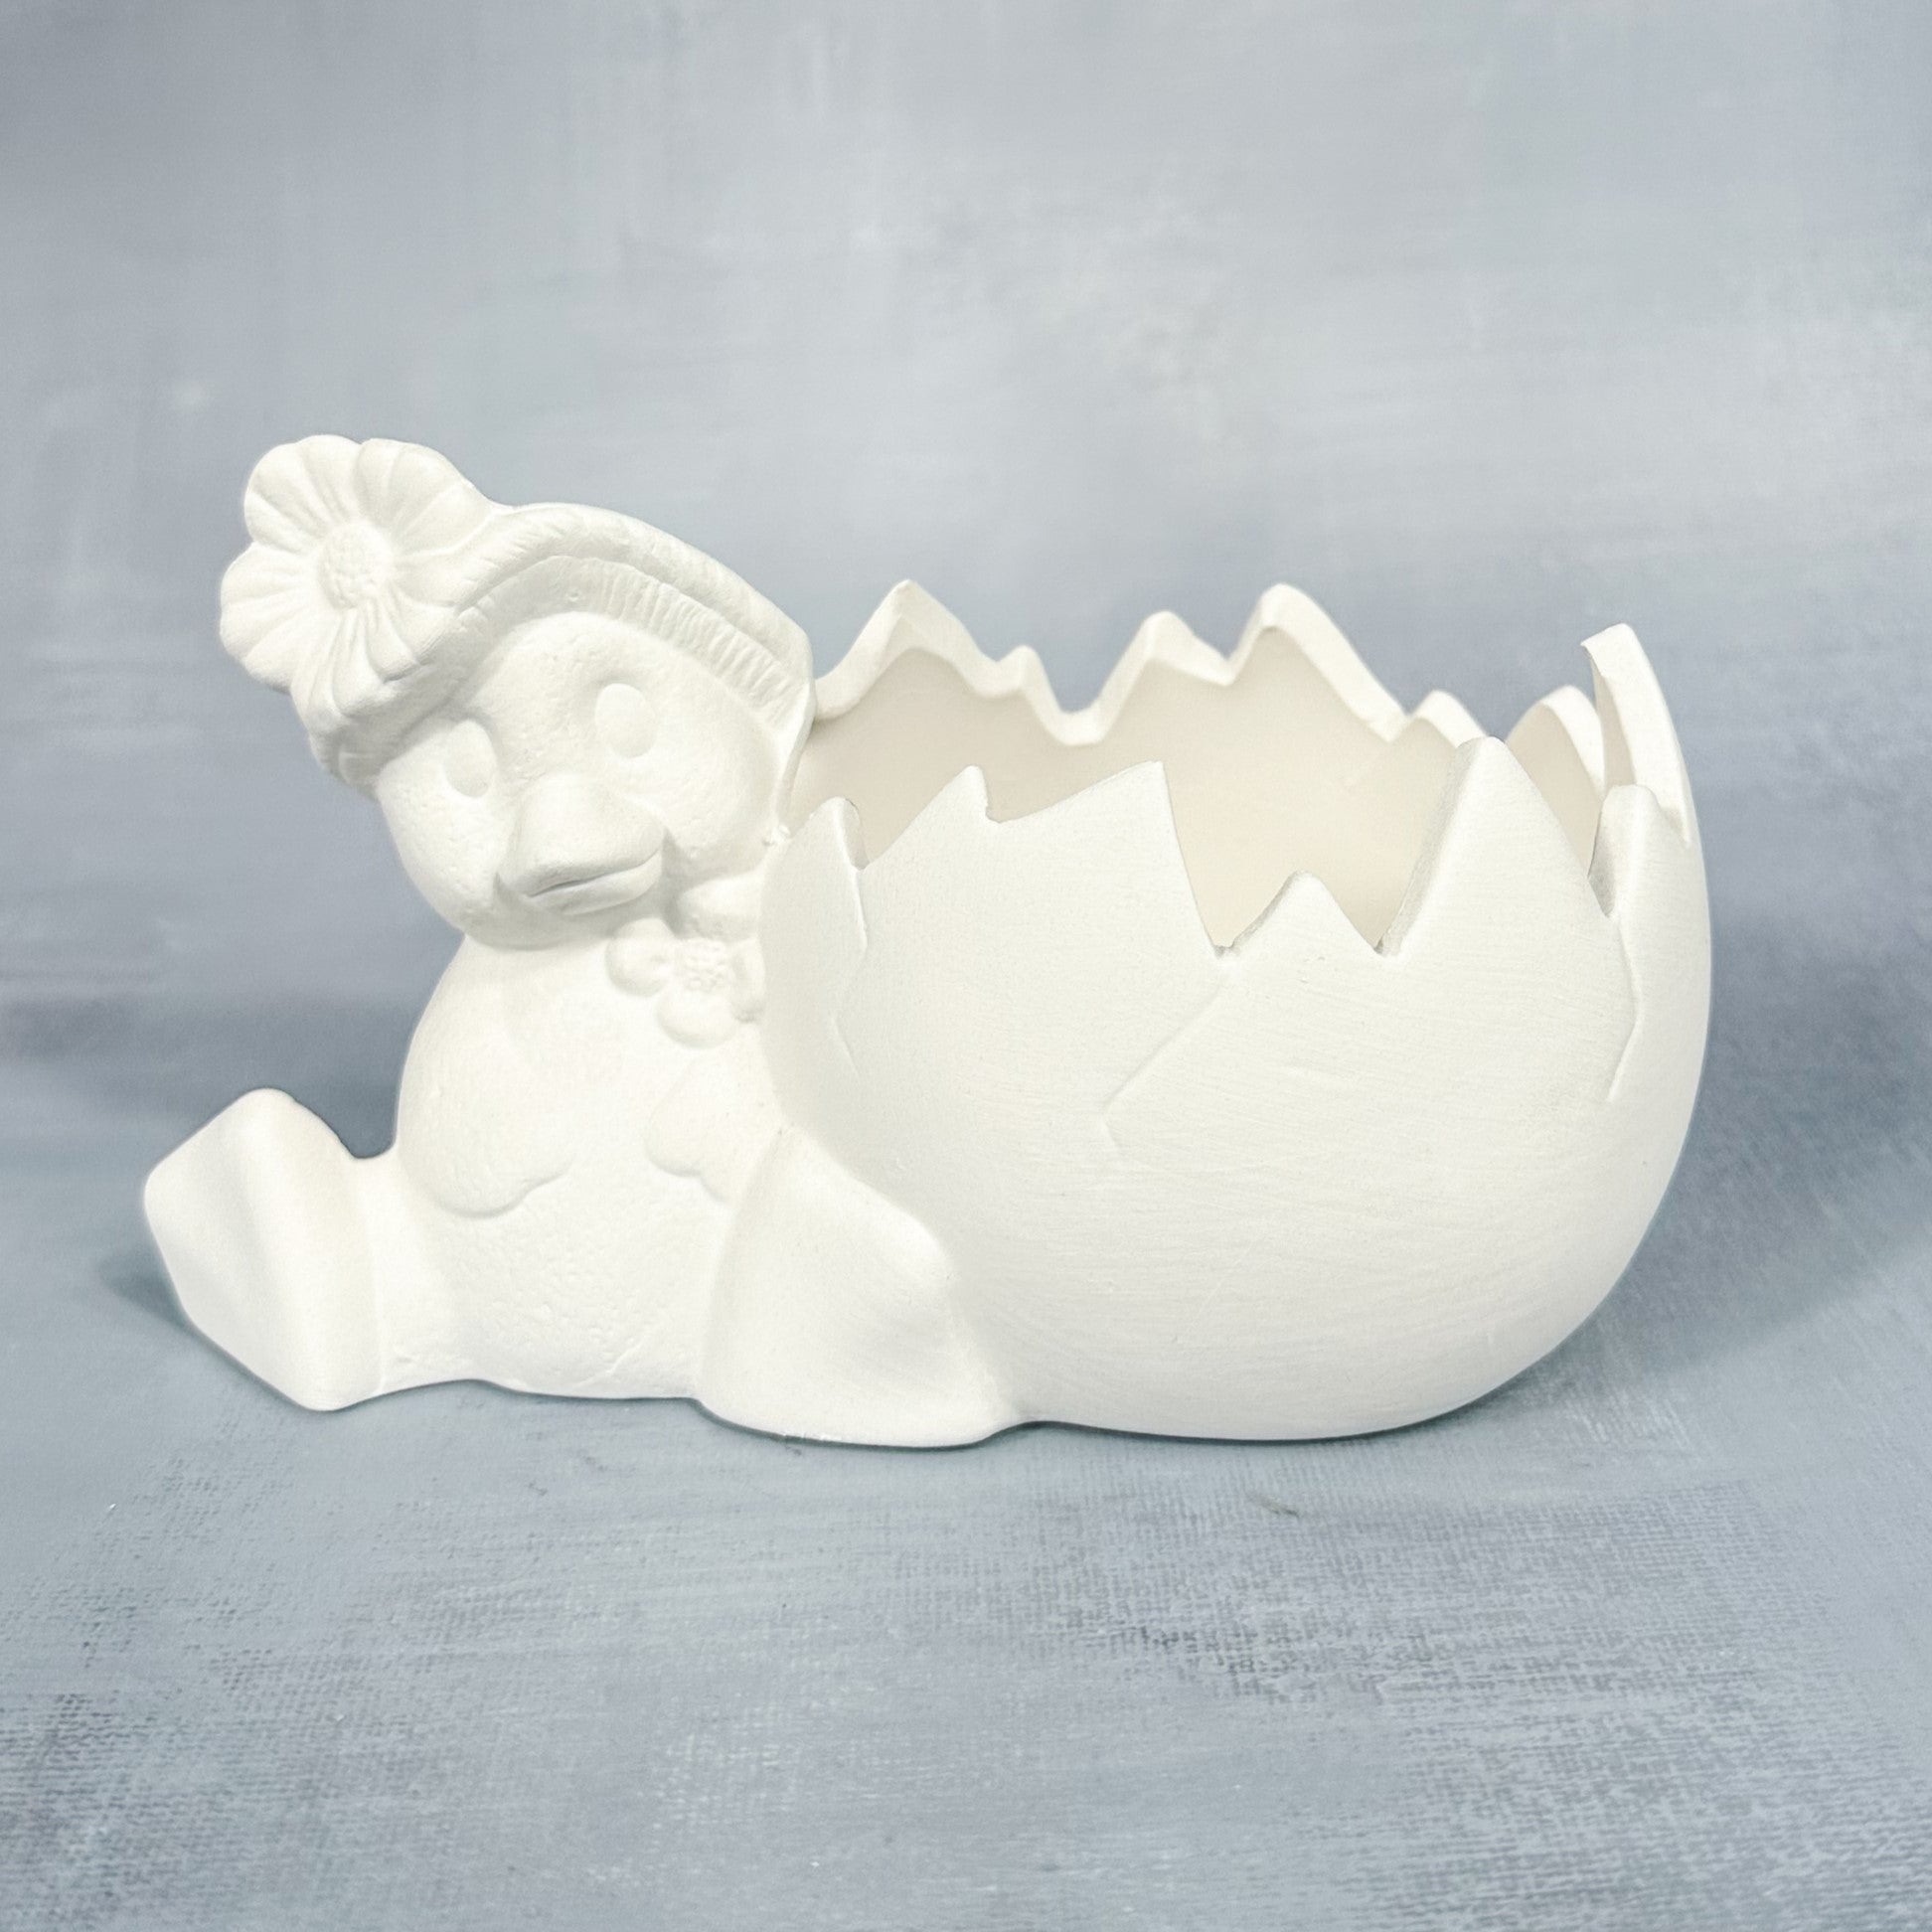 Duck Cracked Egg Candle